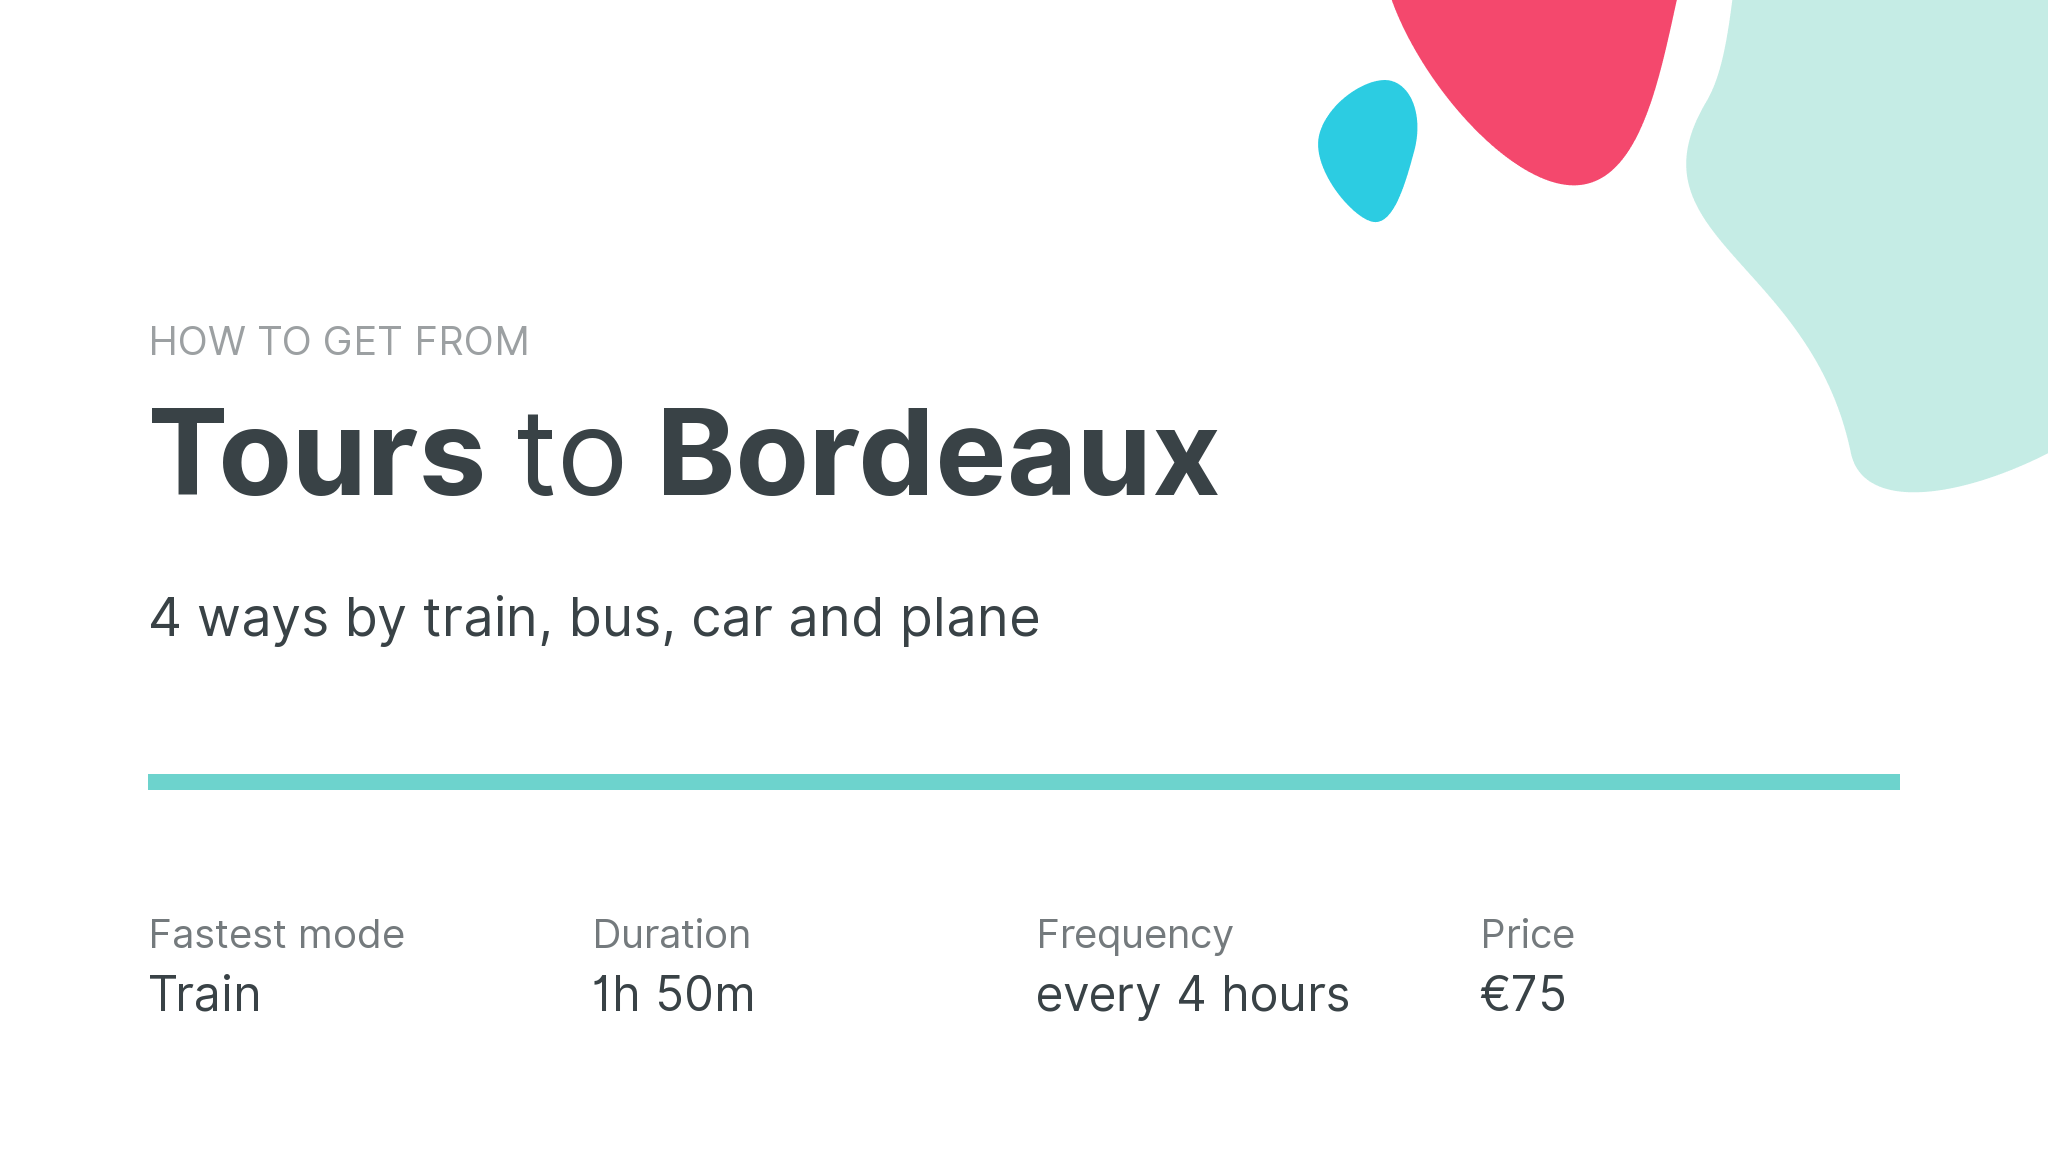 How do I get from Tours to Bordeaux